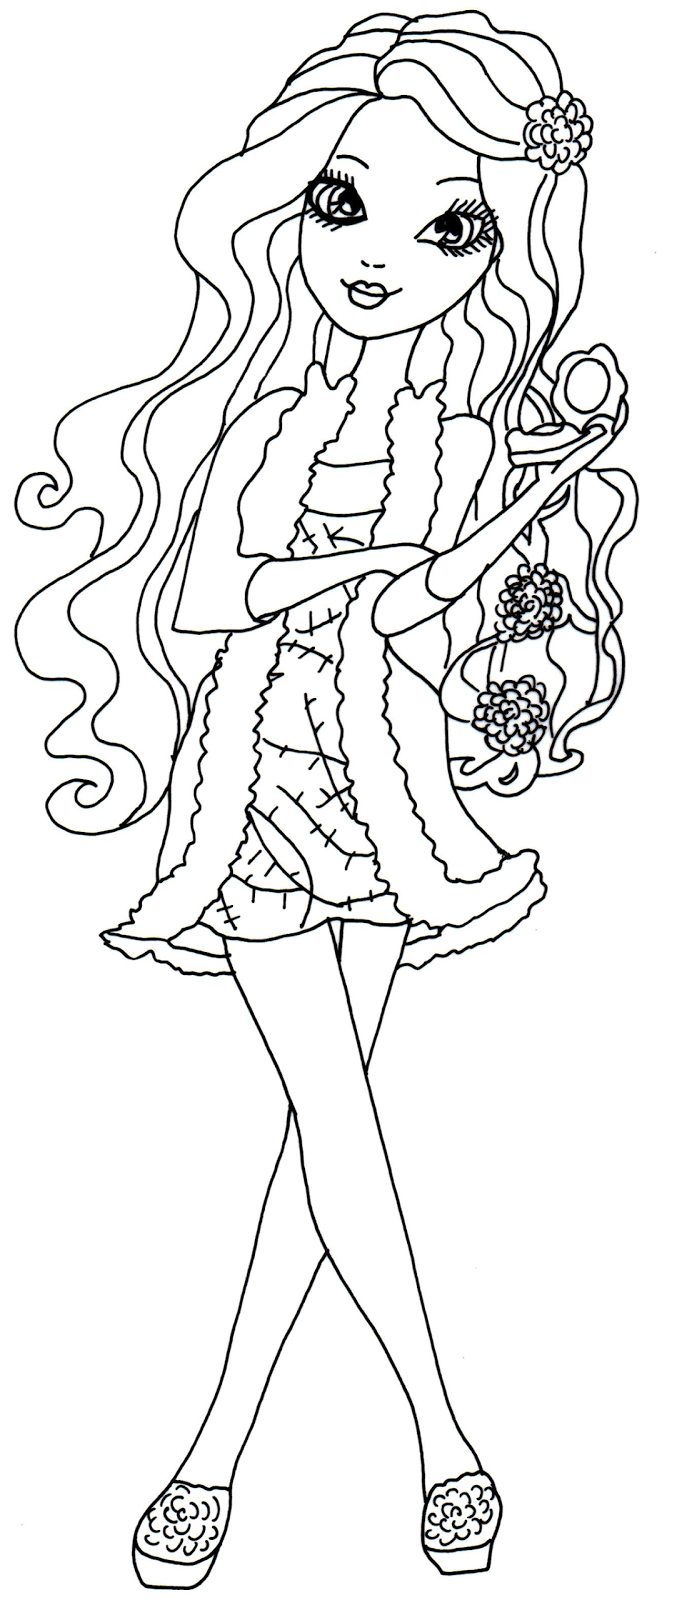 Briar Beauty Getting Fairest Coloring Page Coloring Pages For Girls Coloring Pages An